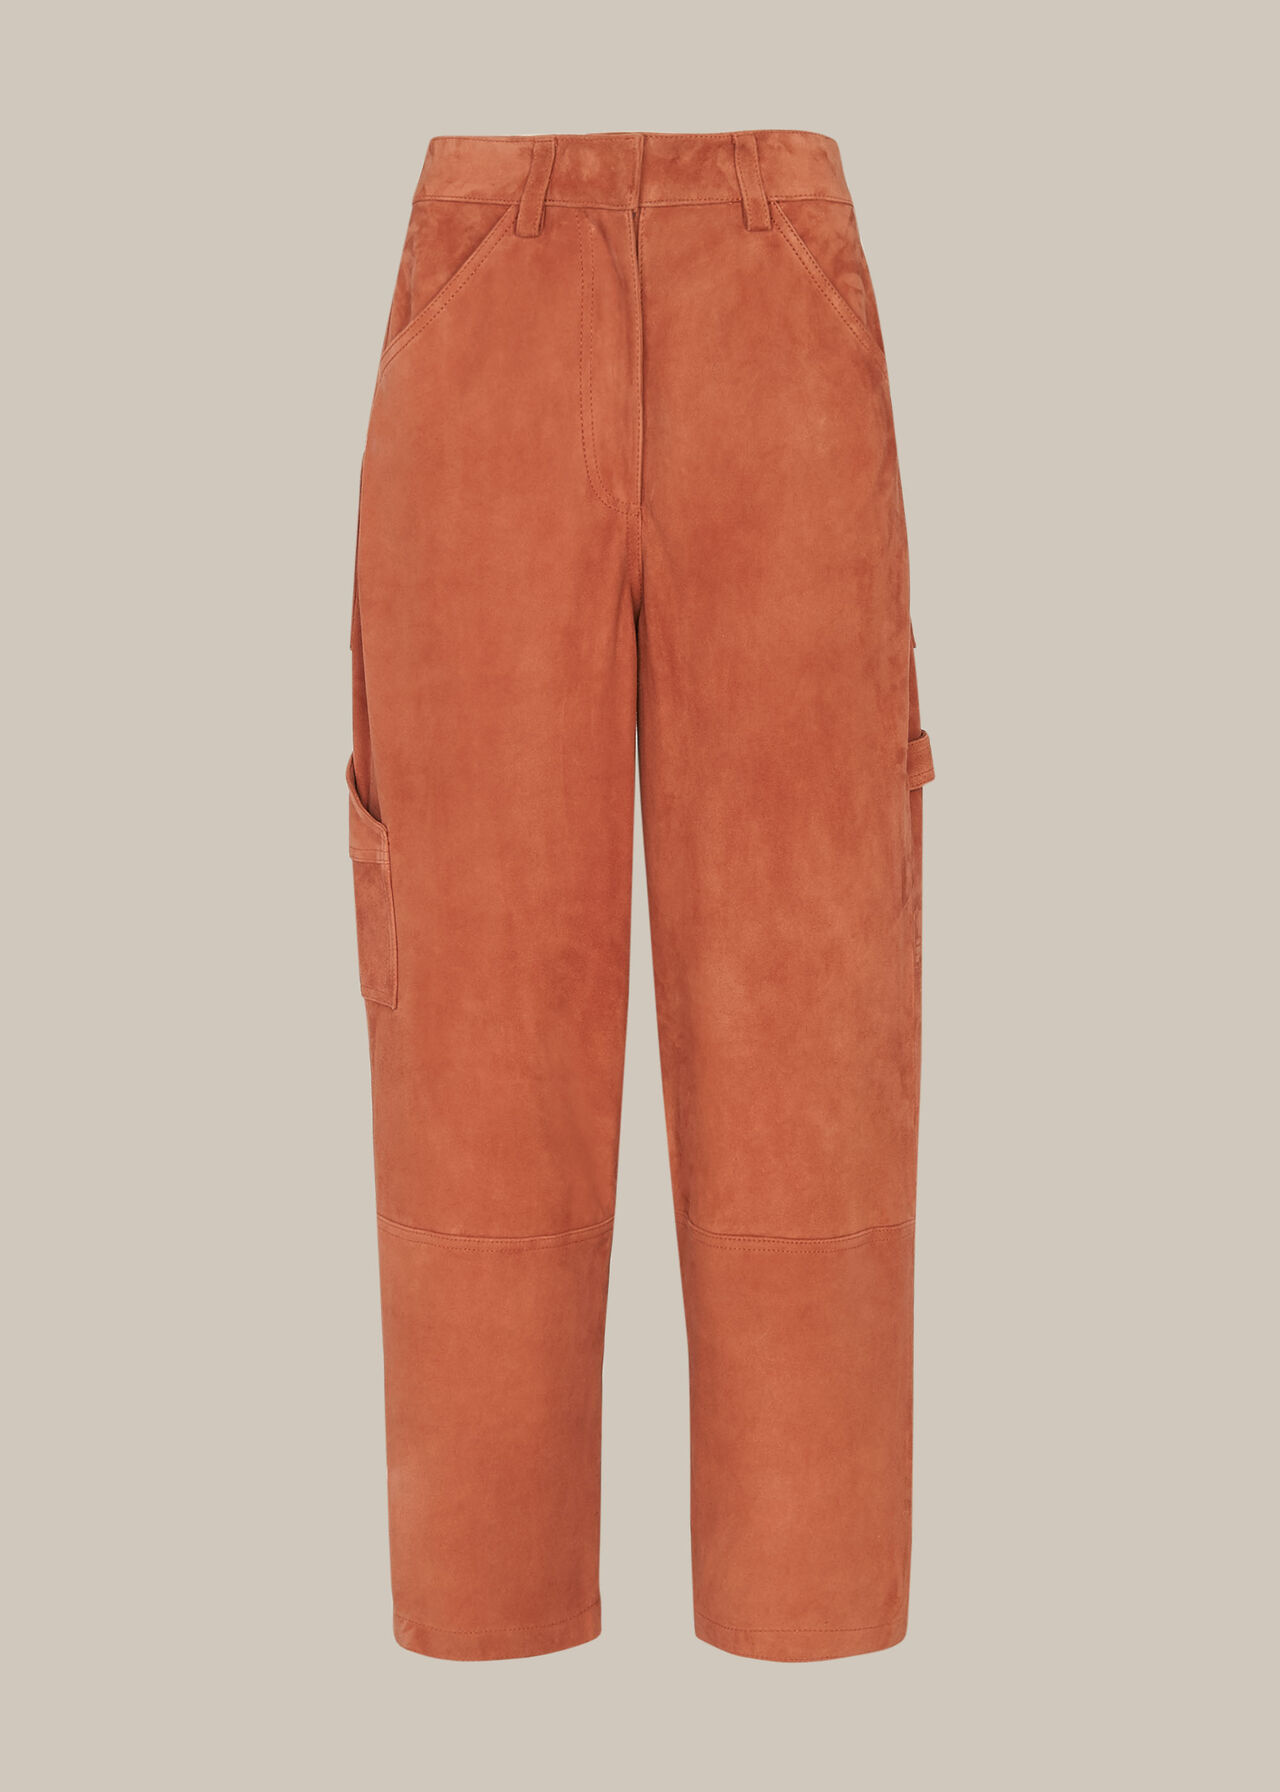 Neutral Suede Leather Cargo Trouser, WHISTLES